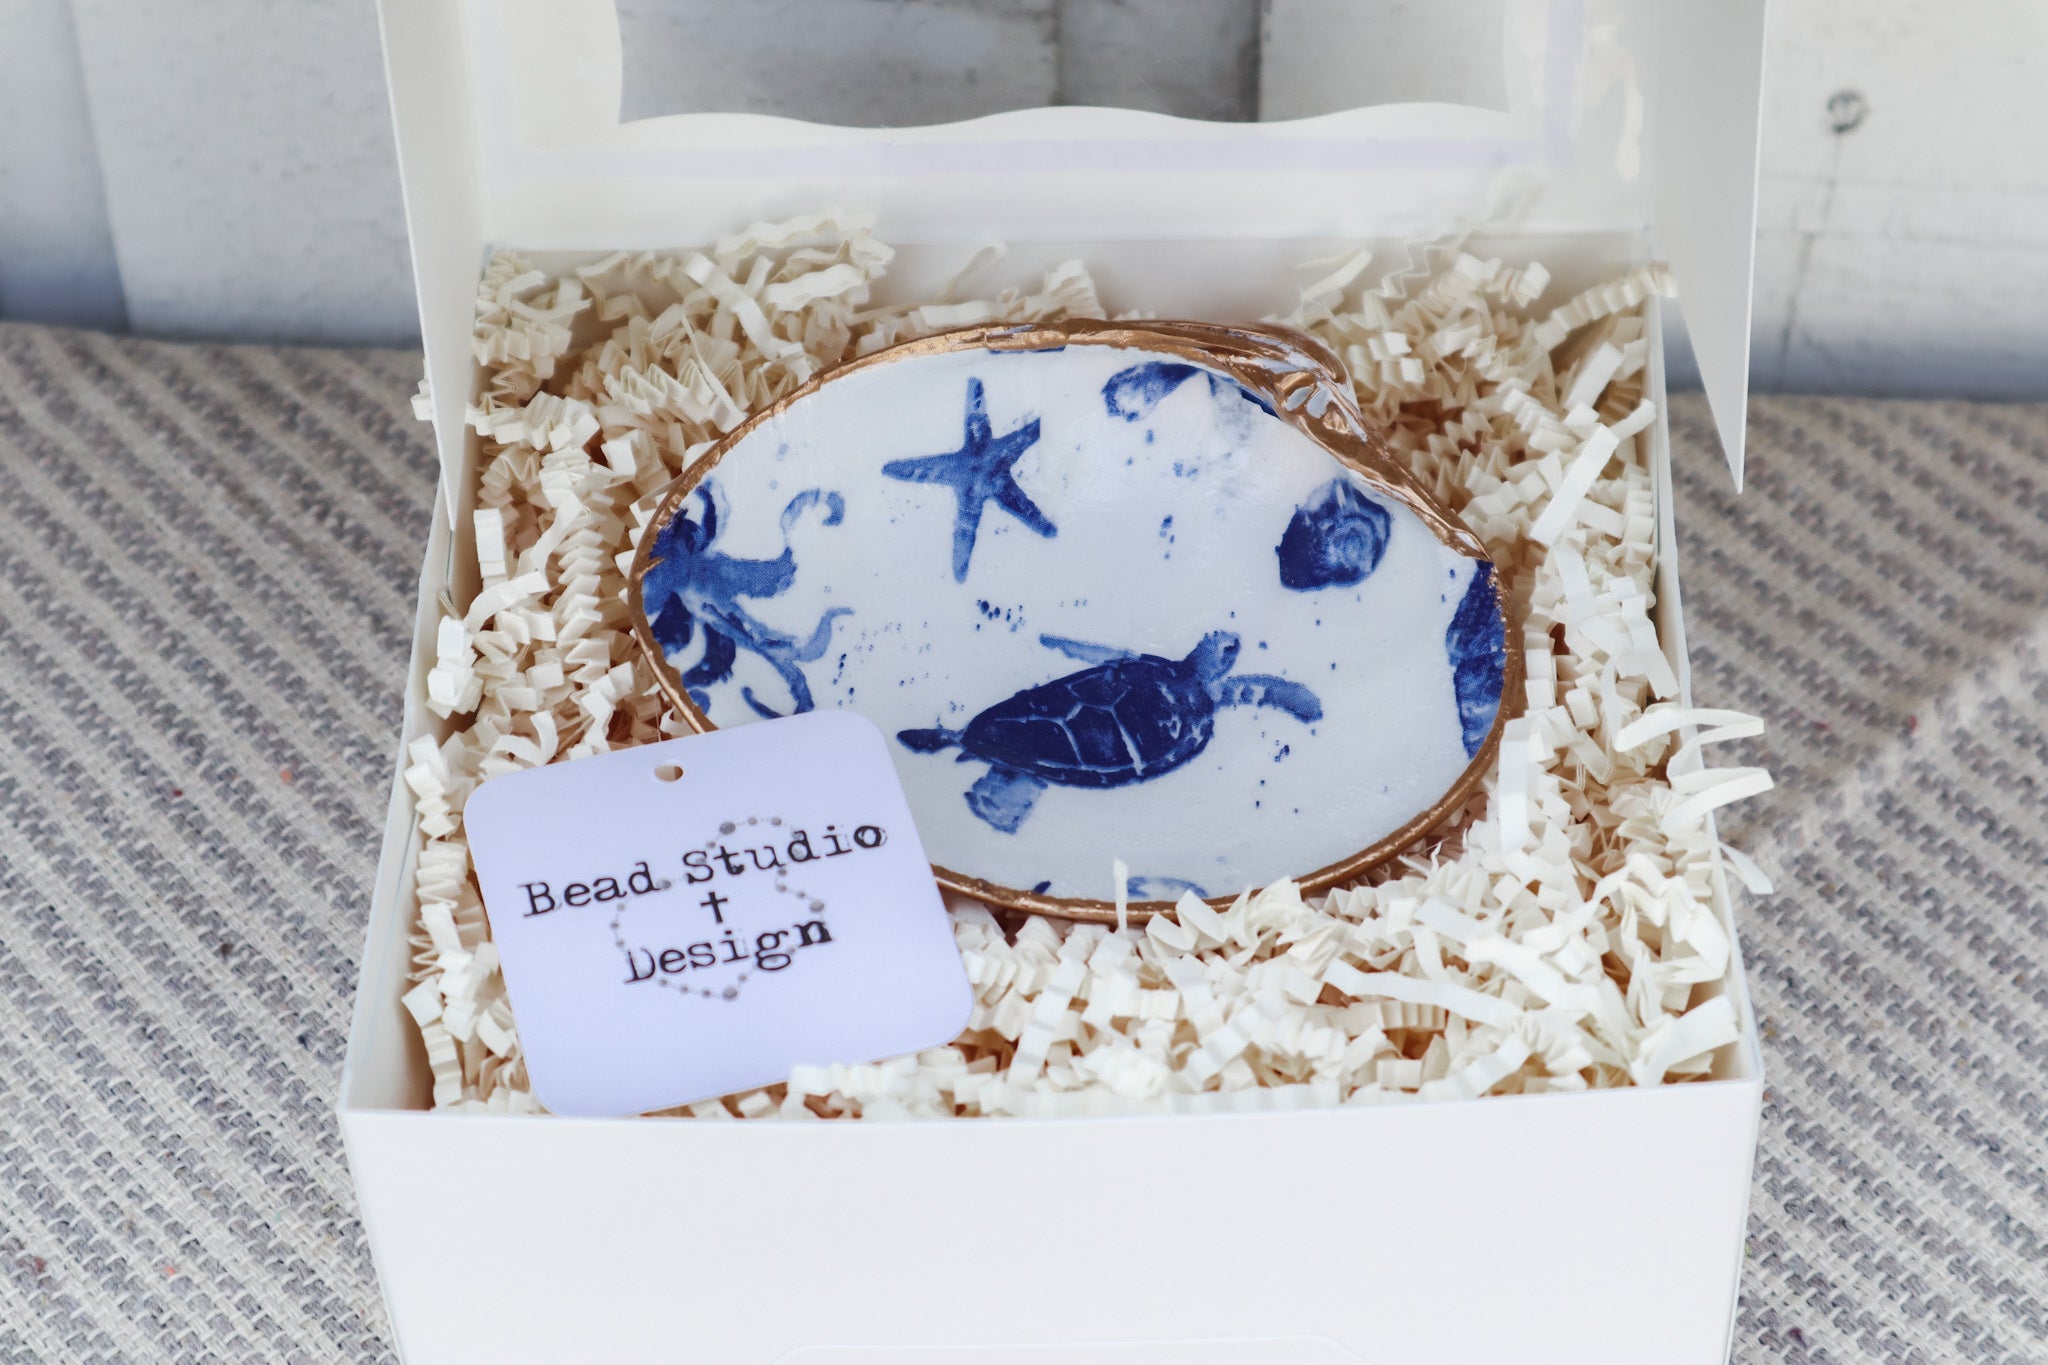 Decoupage Oyster and Clam Shell Ring Dish – Bluffton General Store